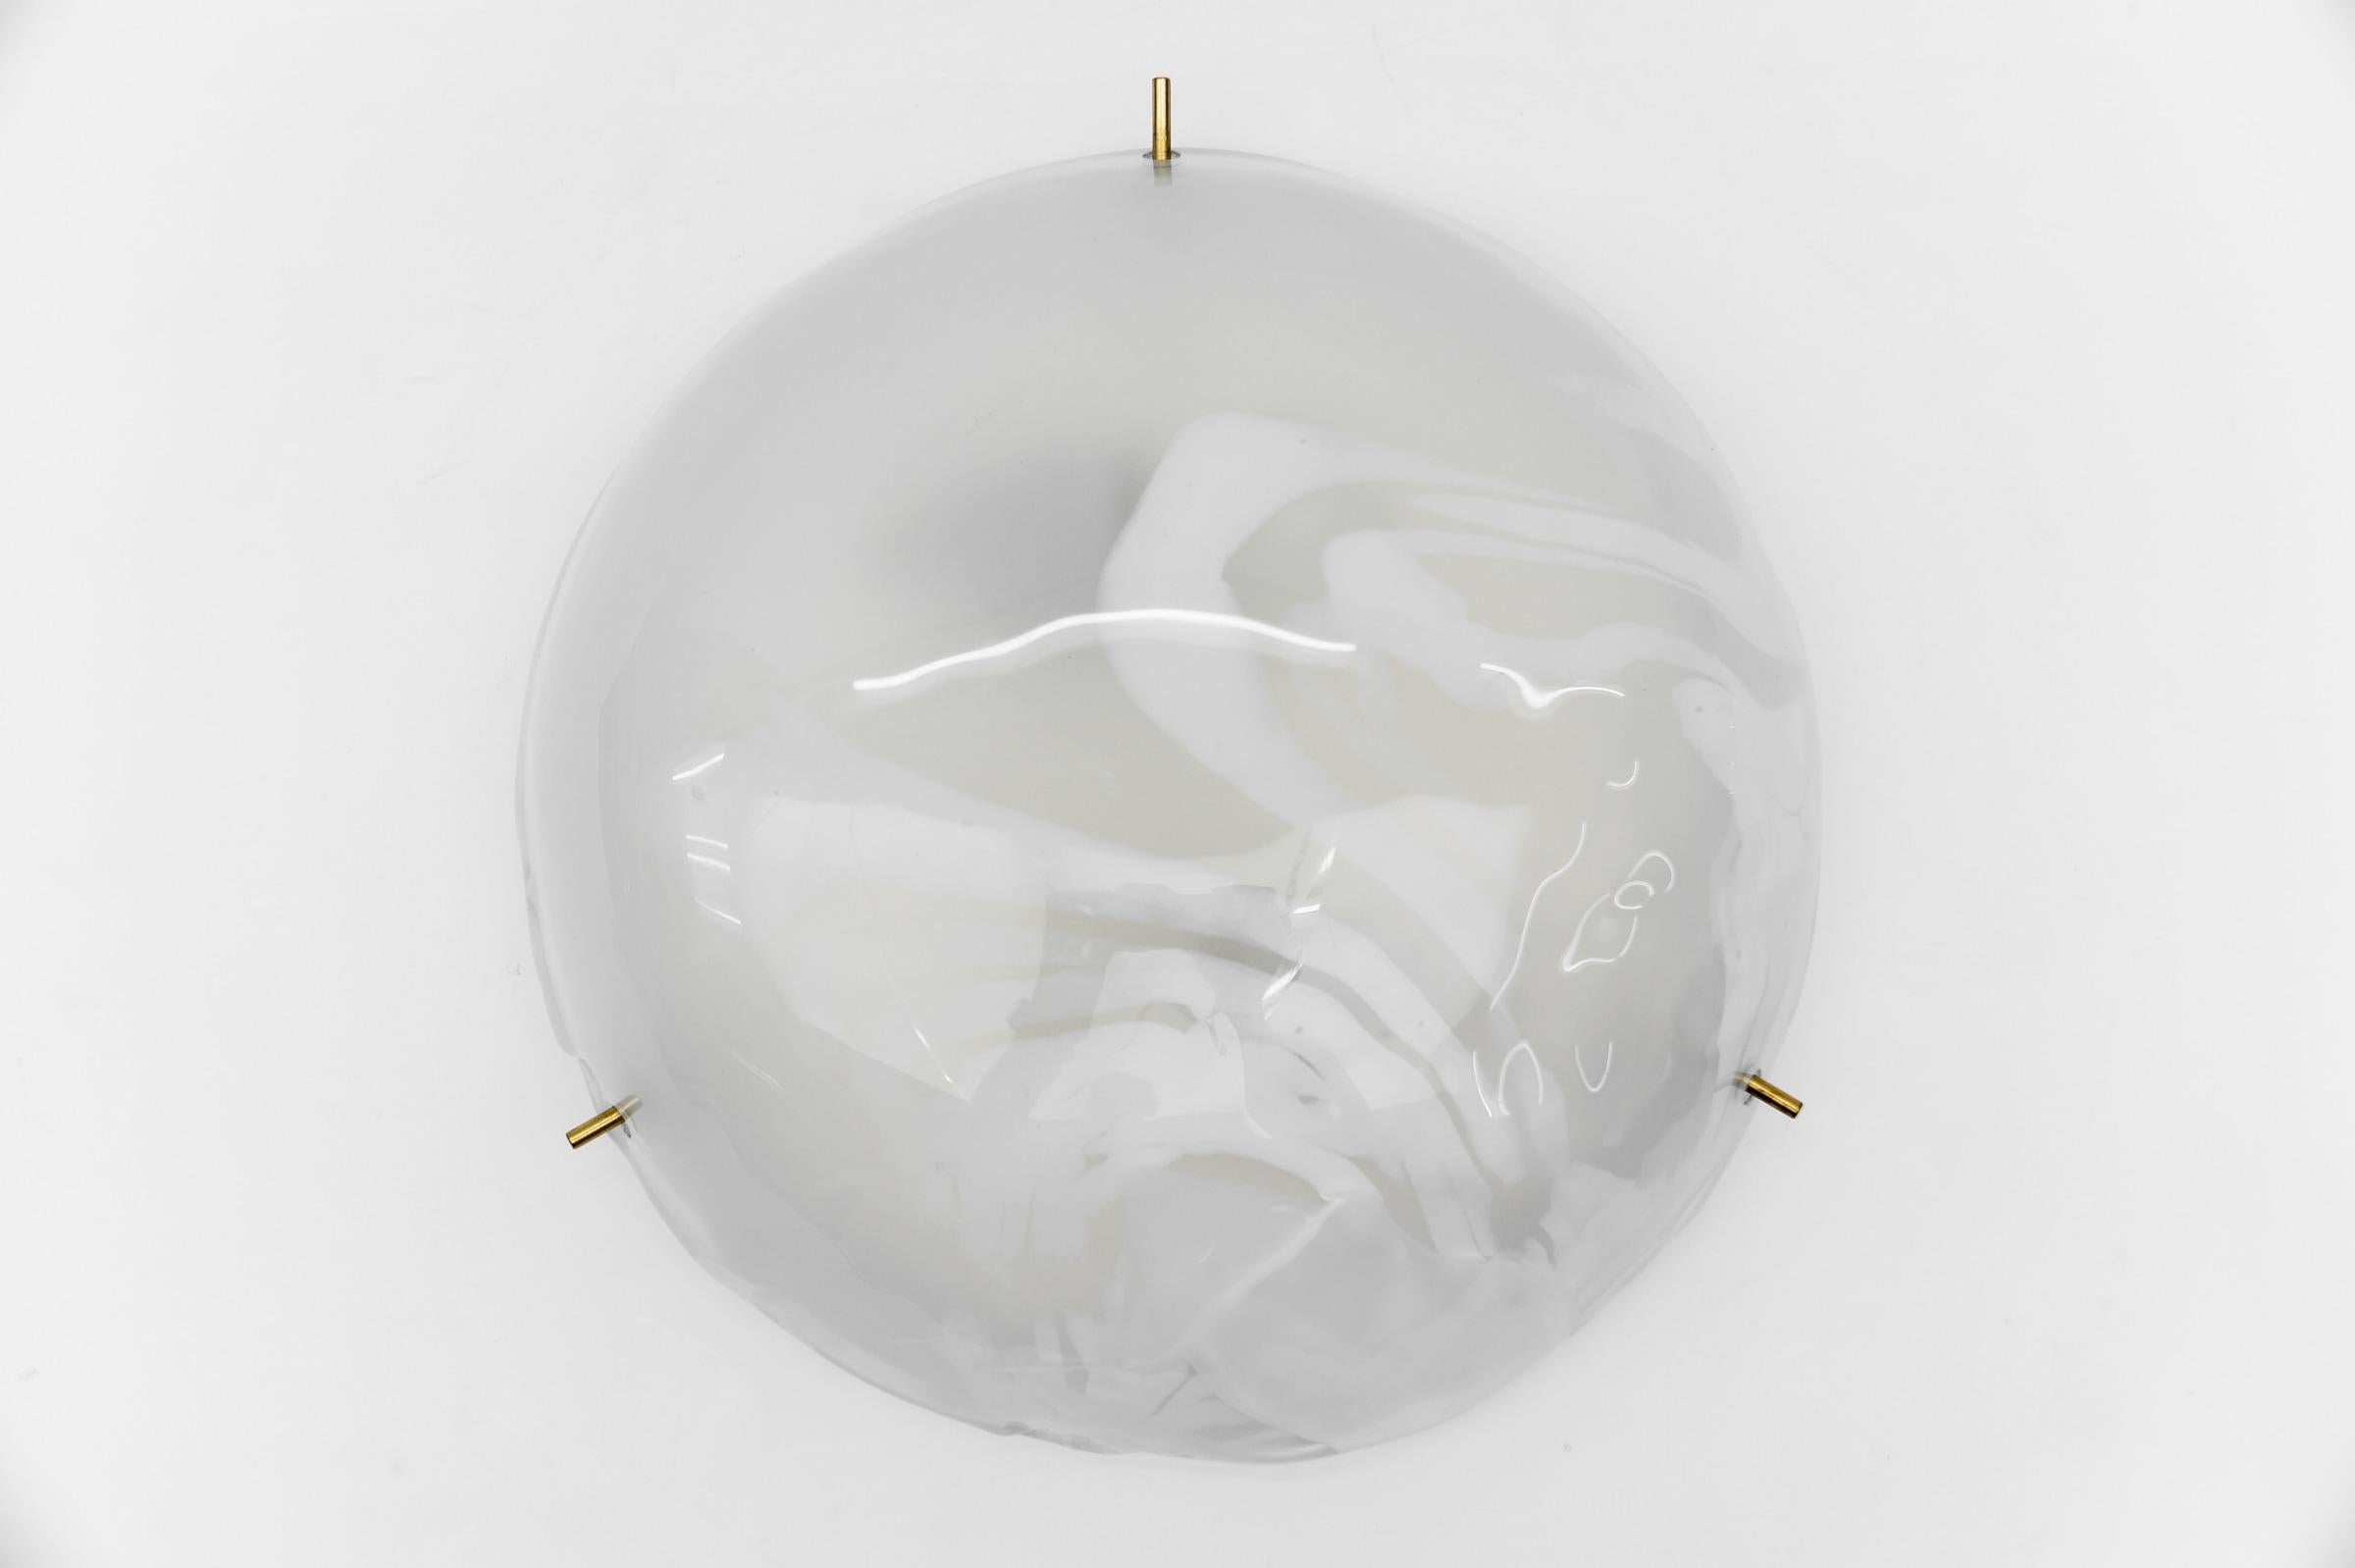 White Murano Glass Flush Mount Light by Hillebrand, Germany 1960s,

Dimensions
Height: 4.33 in. (11 cm)
Diameter: 13.77 in. (35 cm)

The fixture need 2 x E27 standard bulb with 60W max.

Light bulbs are not included.
It is possible to install this